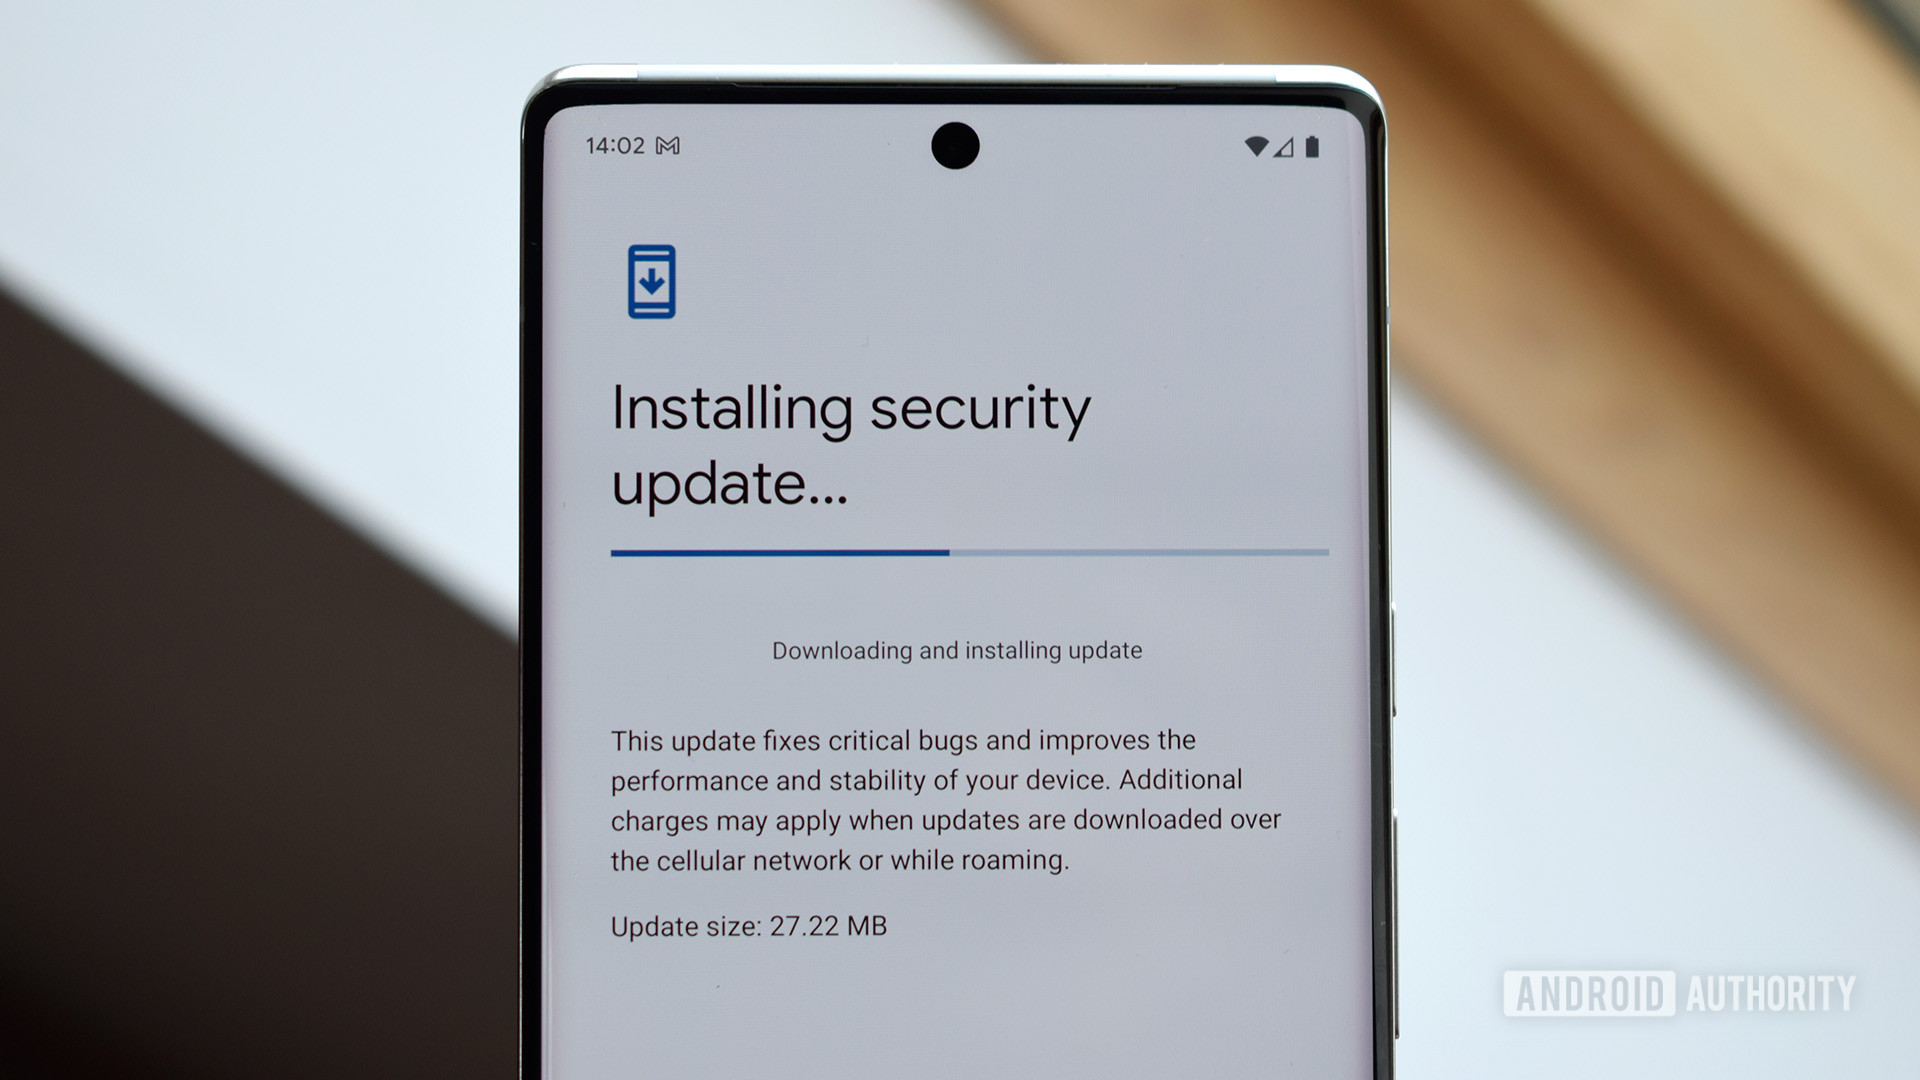 A security update installing on a phone.